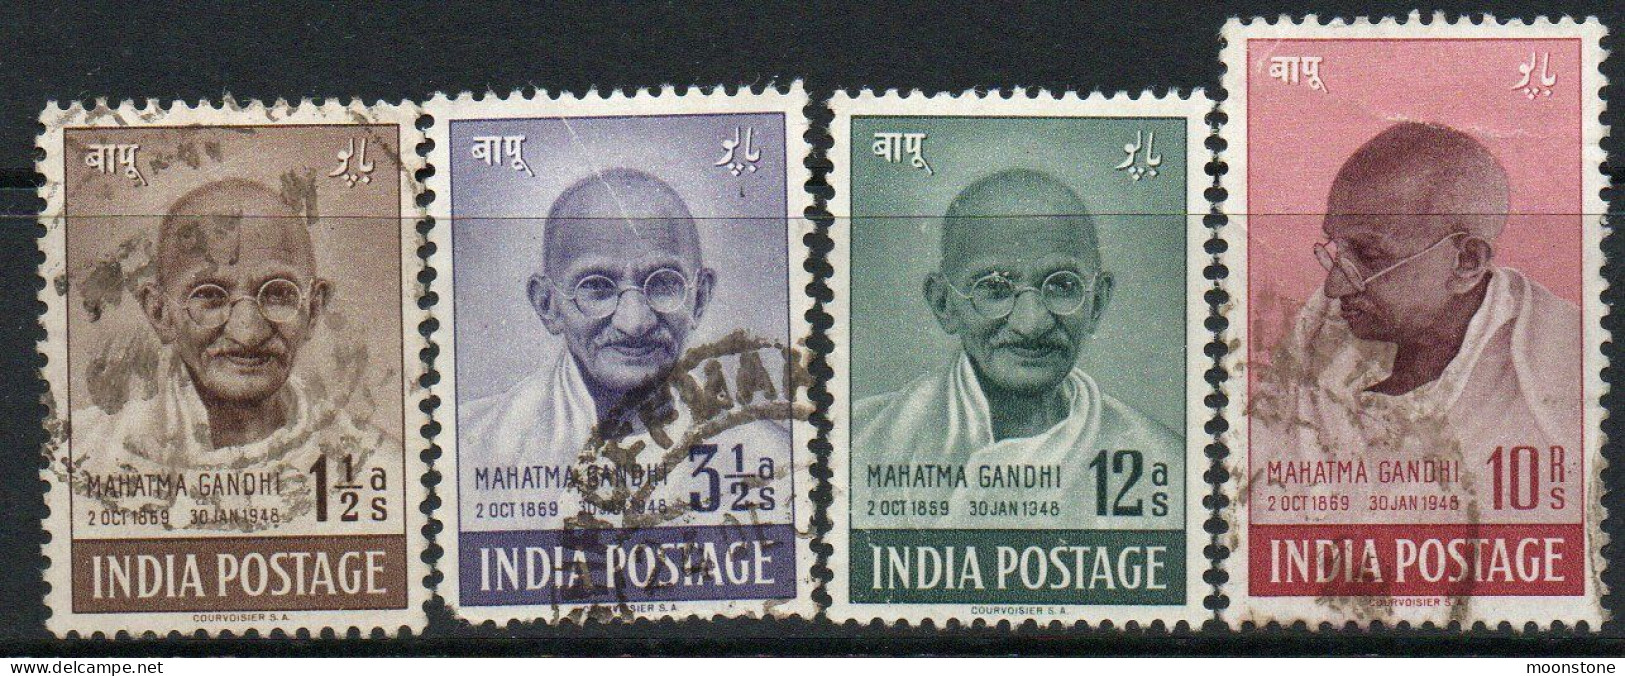 India 1948 1st Anniversary Of Independence, Mahatma Gandhi Set Of 4, Wmk. Multiple Star, Used, SG 305/8 (E) - Used Stamps